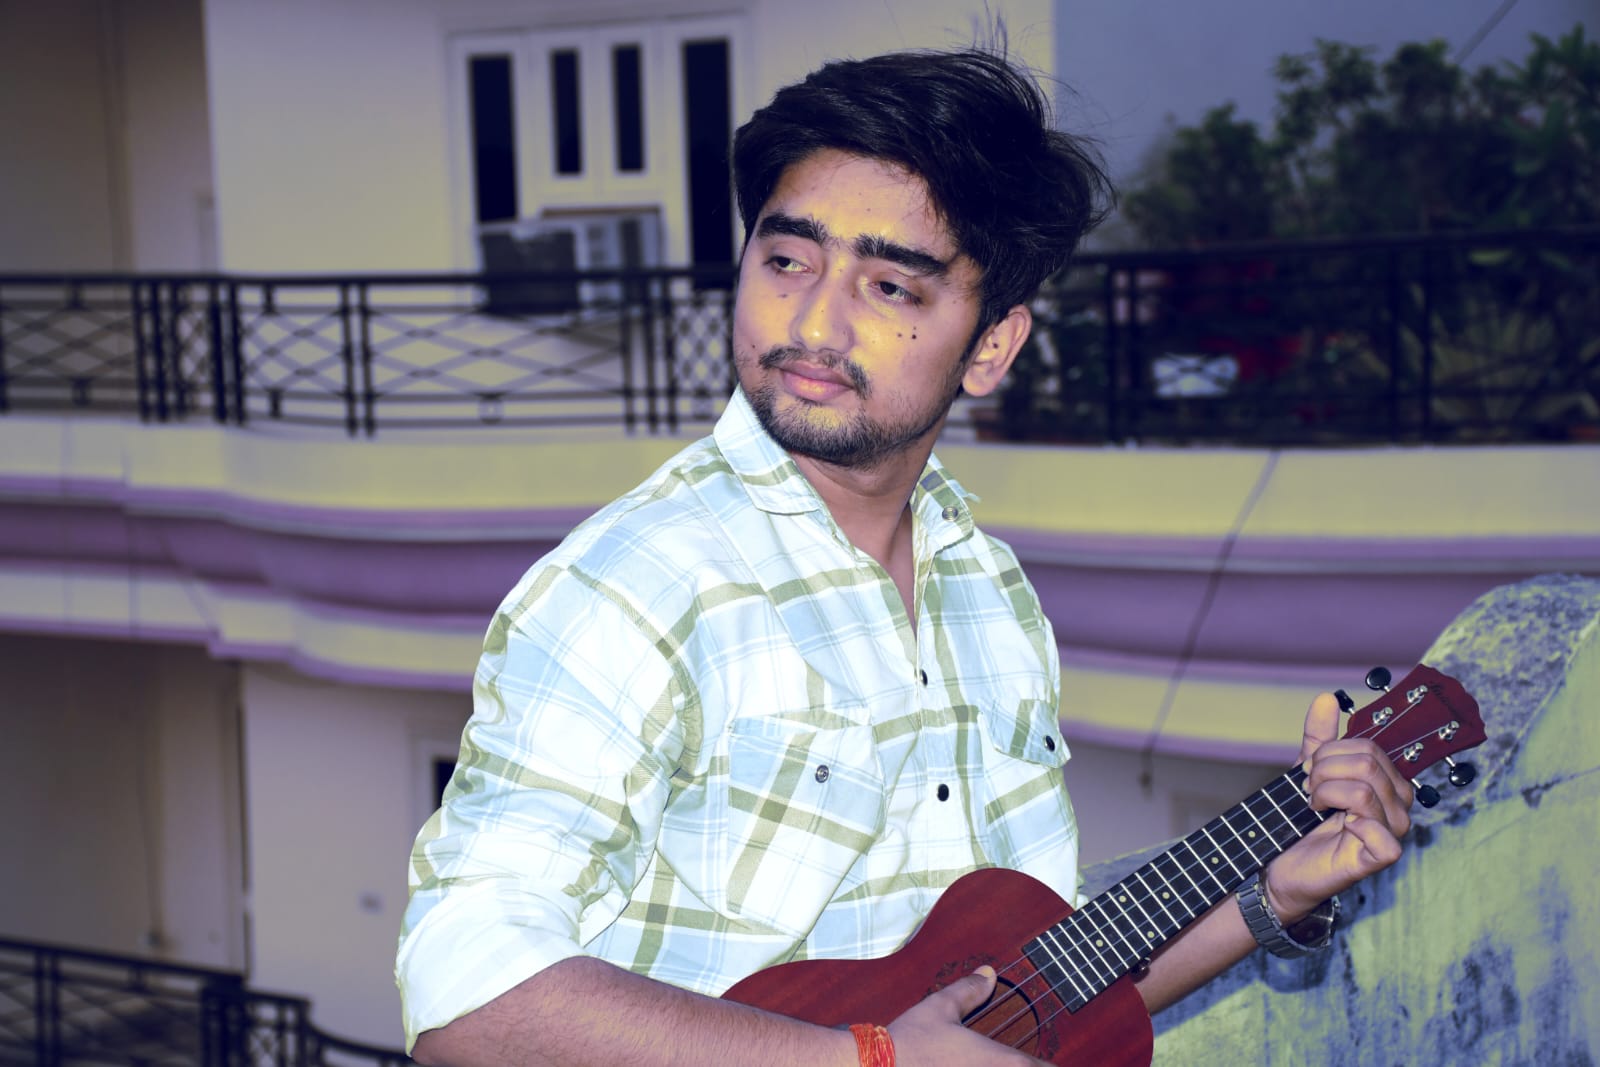 Meet Prashant Singh Kalhans (PSK): The 22-Year-Old Indie Artist from Lucknow Ready to Make Waves with His New Single “Bata Na”